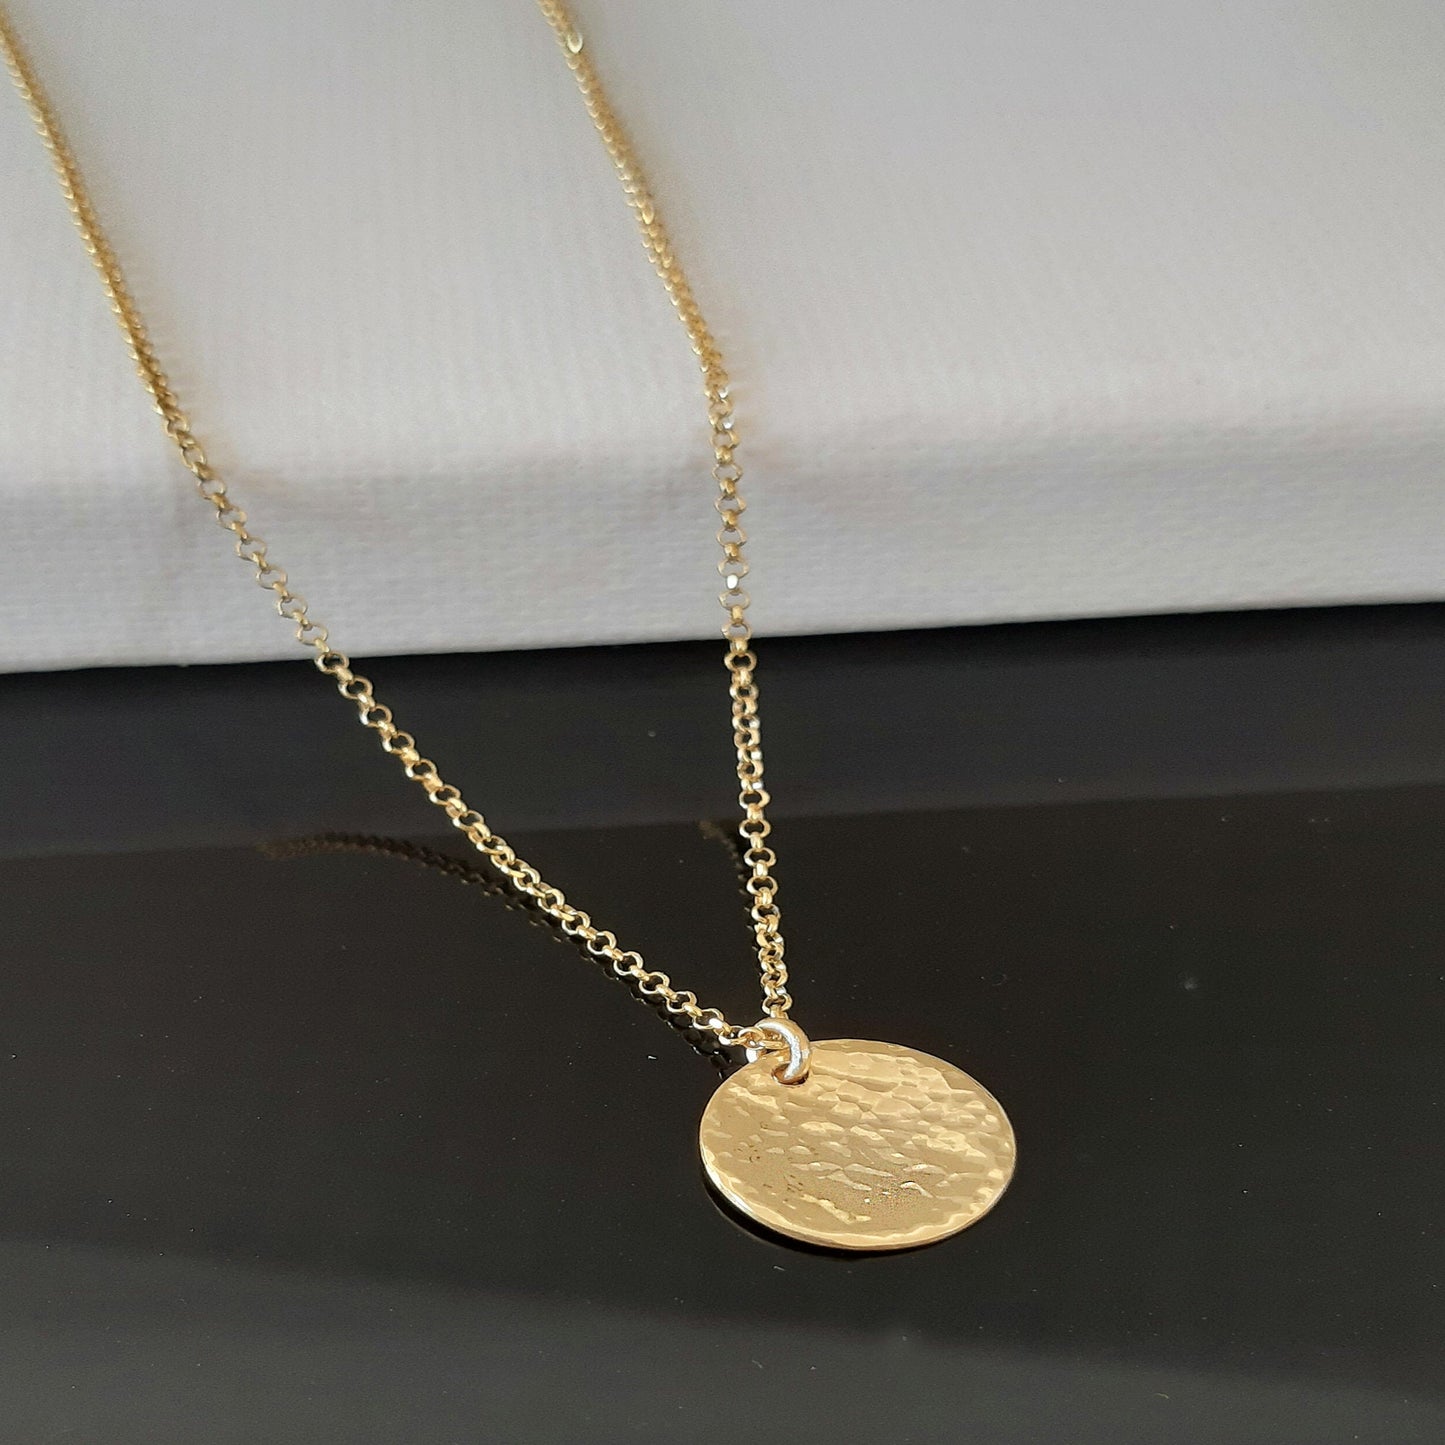 Hammered Gold Disc Necklace, 14k Gold Disc necklace, Minimalist Necklace gold layered necklace, dainty gold necklace birthday gifts for her